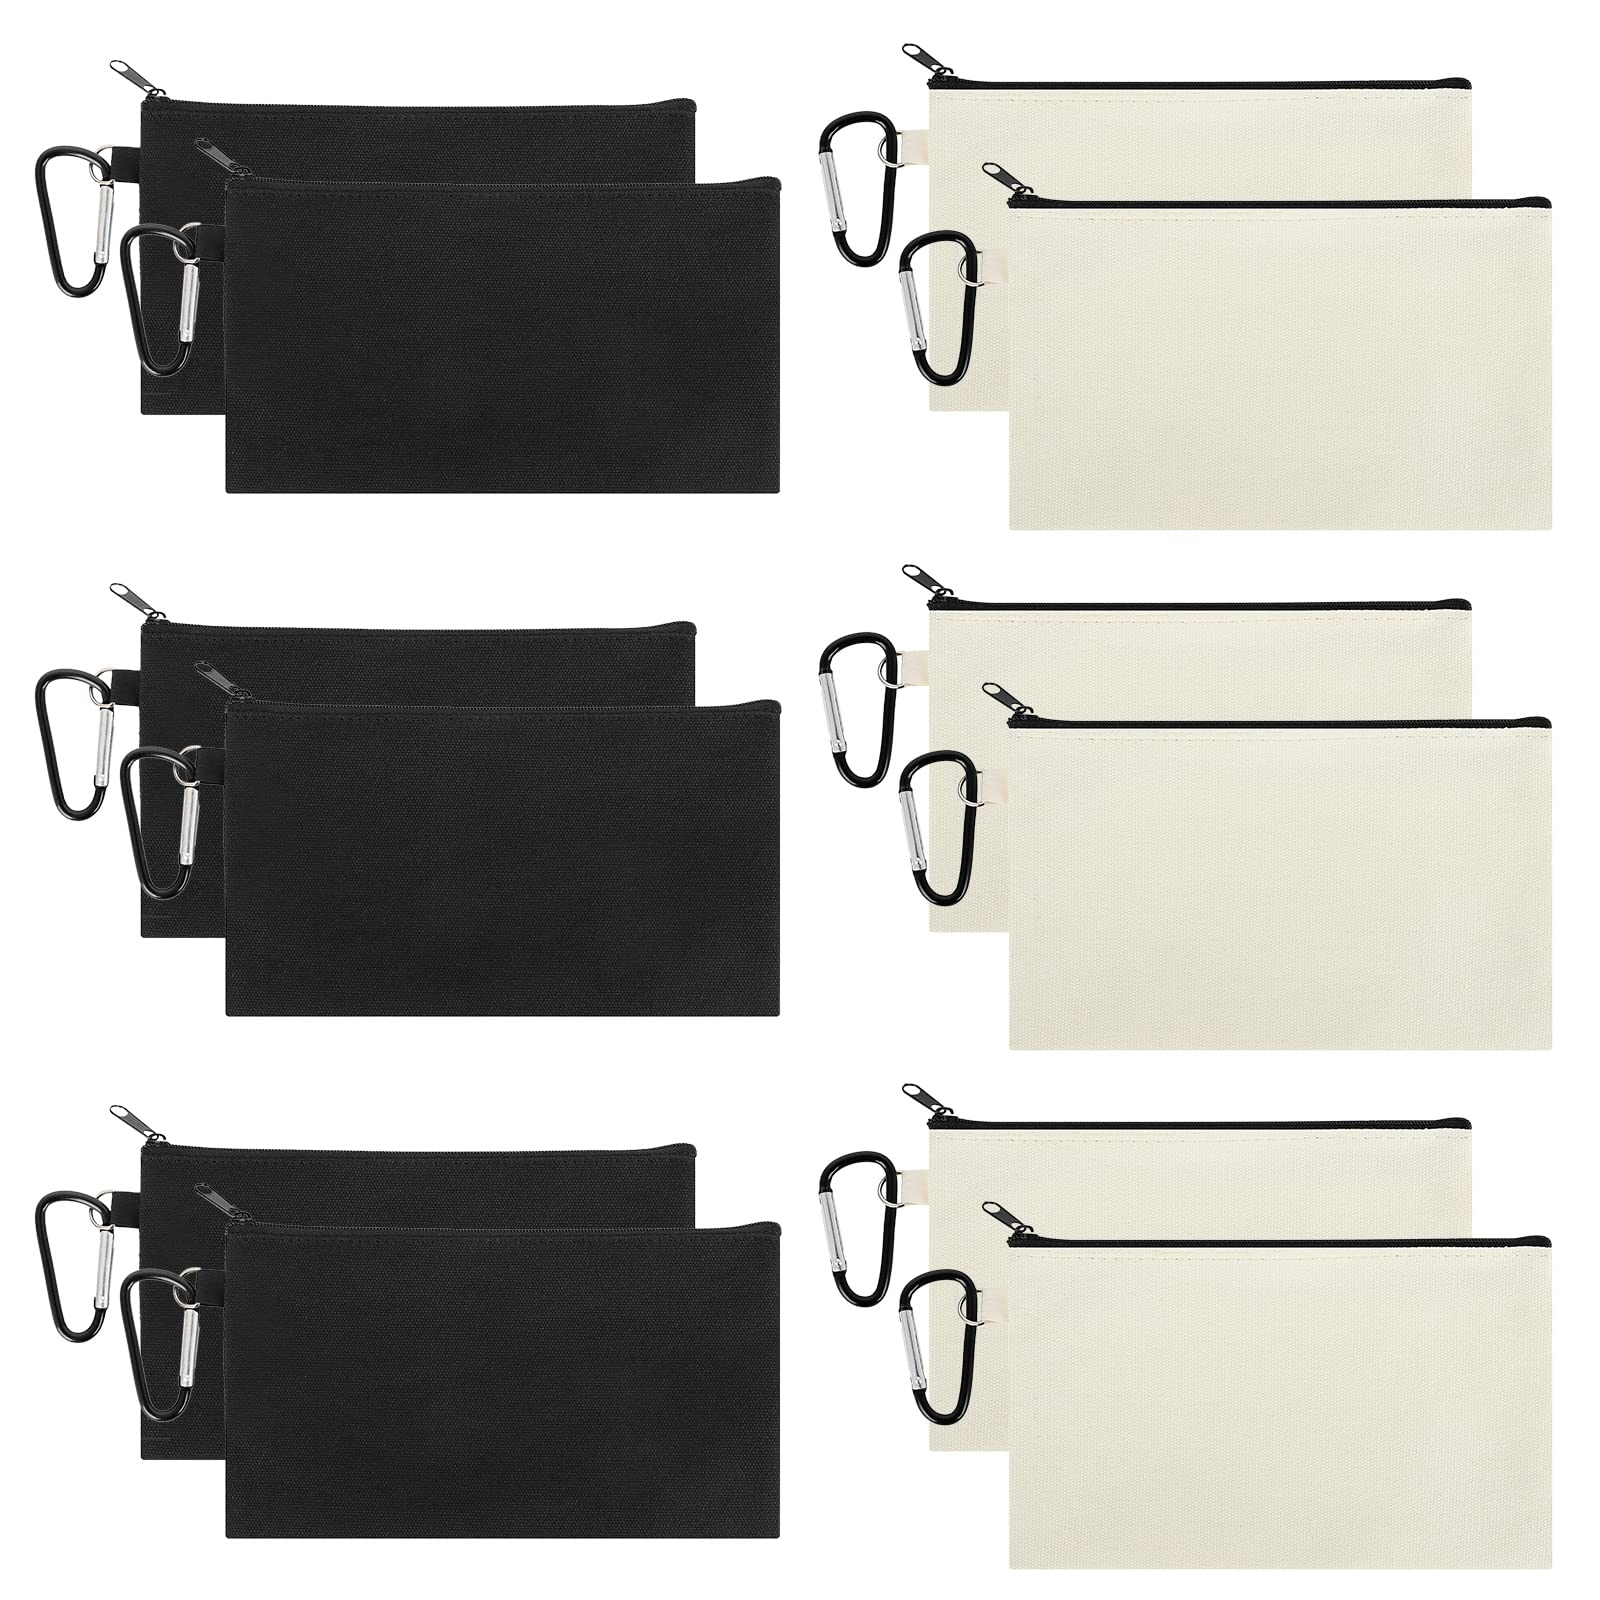 Muka 12 Pack Canvas Purse with Zipper & Metal Clip, 7-3/4 x 4-1/2 Inches Travel Toiletry (Black & Natural)